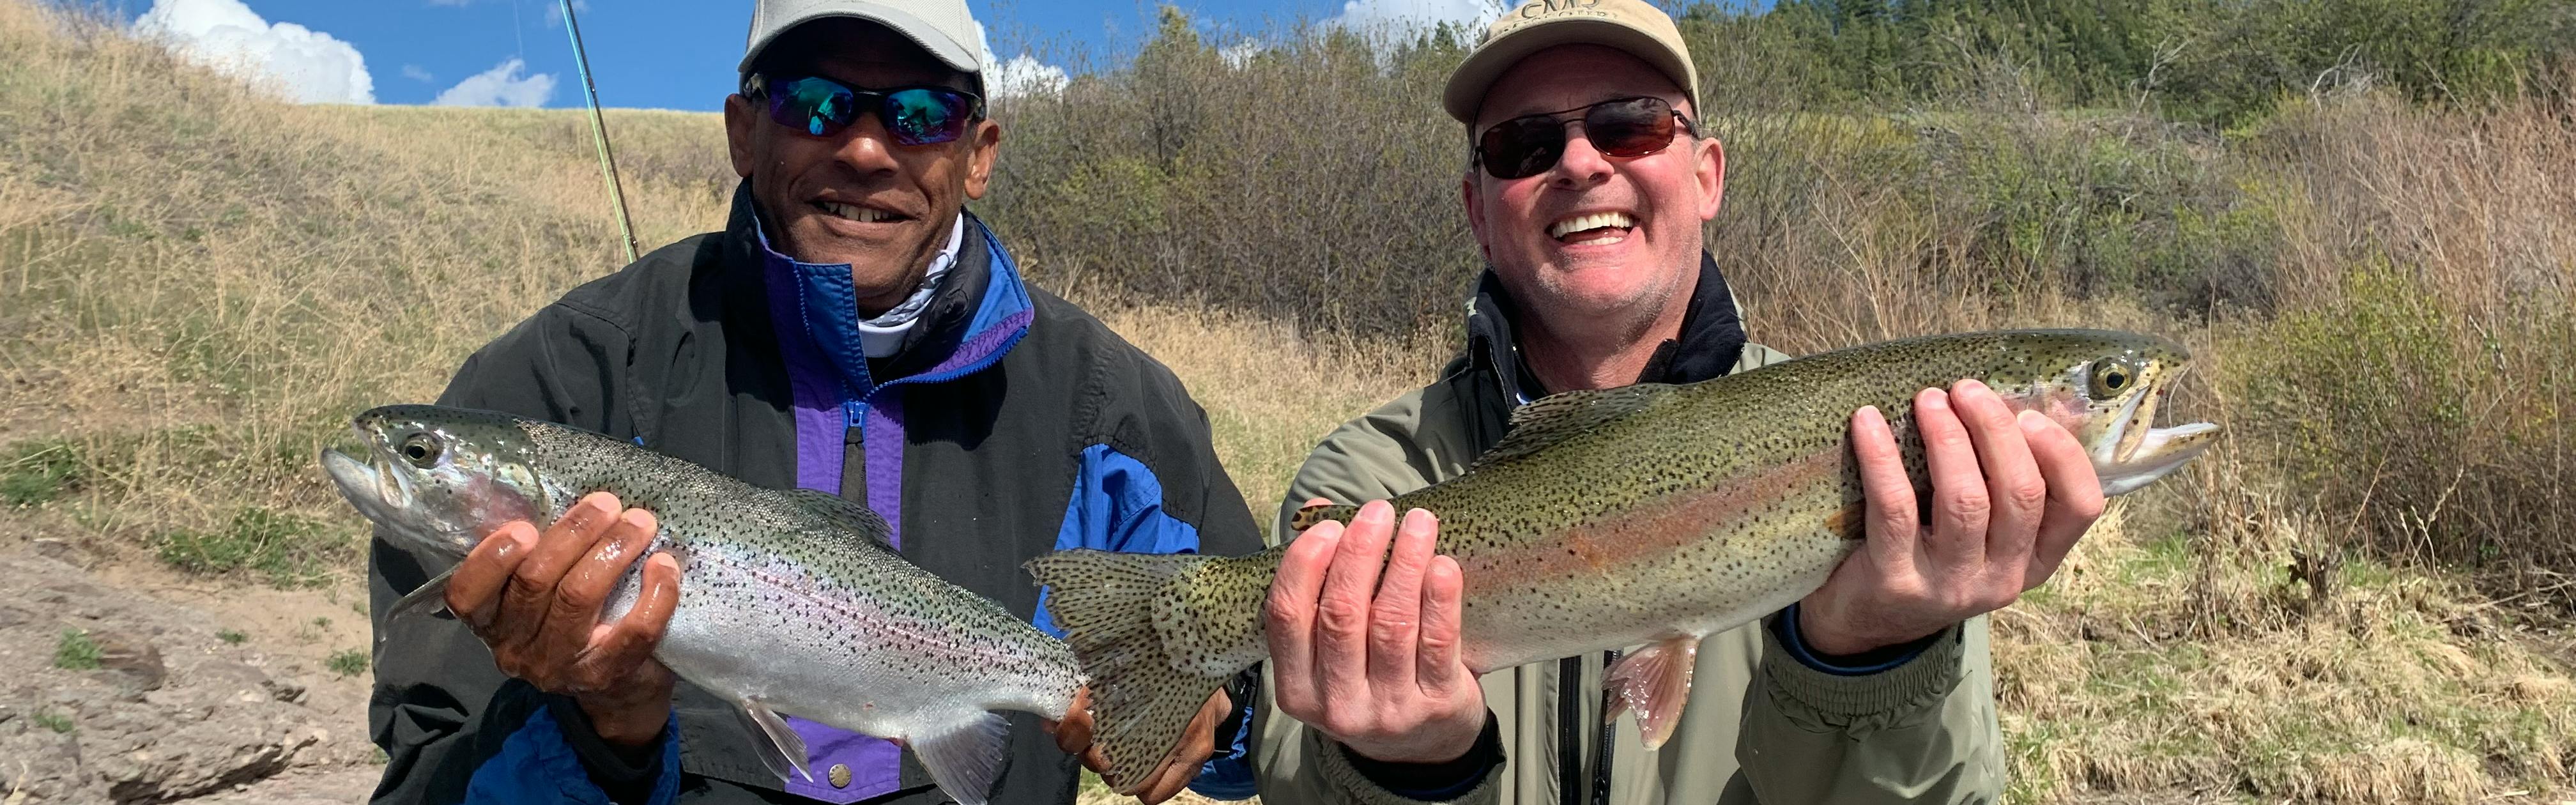 An Expert Guide to the Best Fly Fishing in Montana